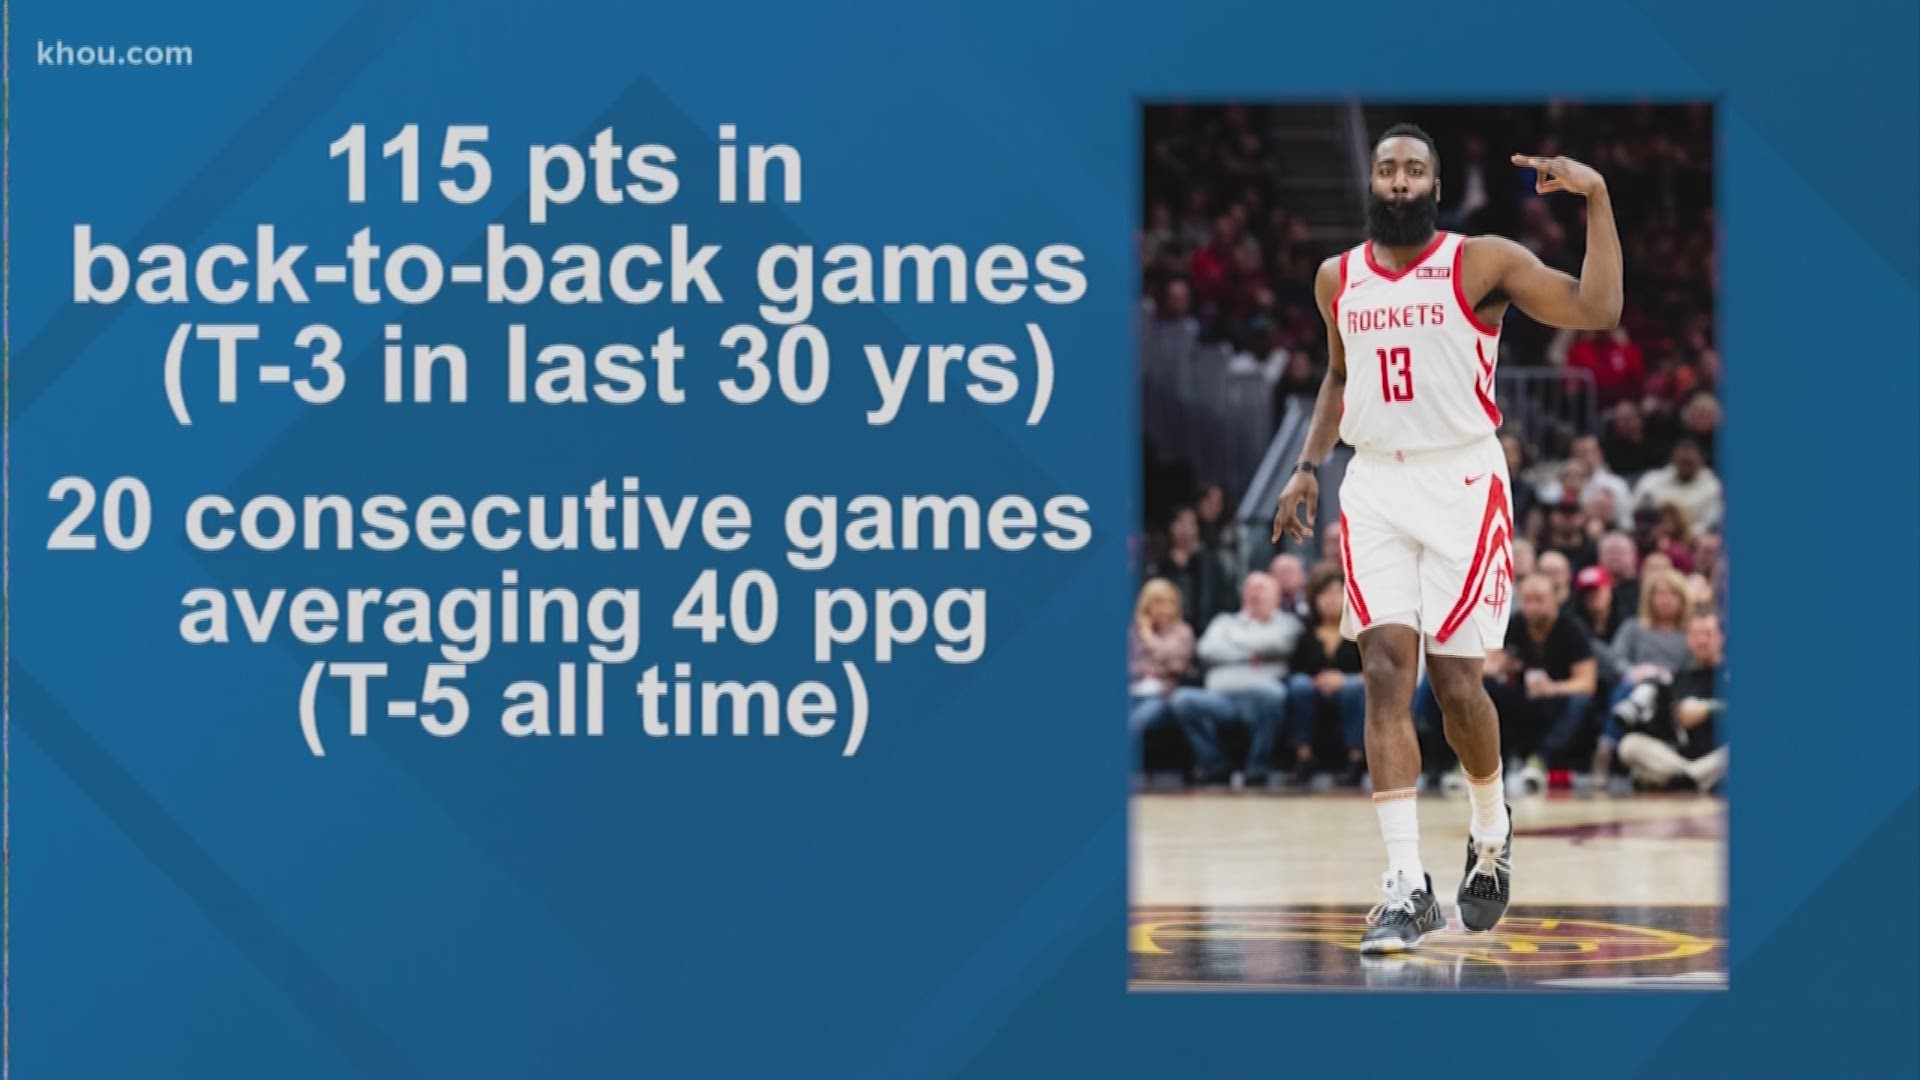 James Harden turned in back-to-back games of 57 and 58 points. That's tied for third in the last 30 years with the most points in two straight games.